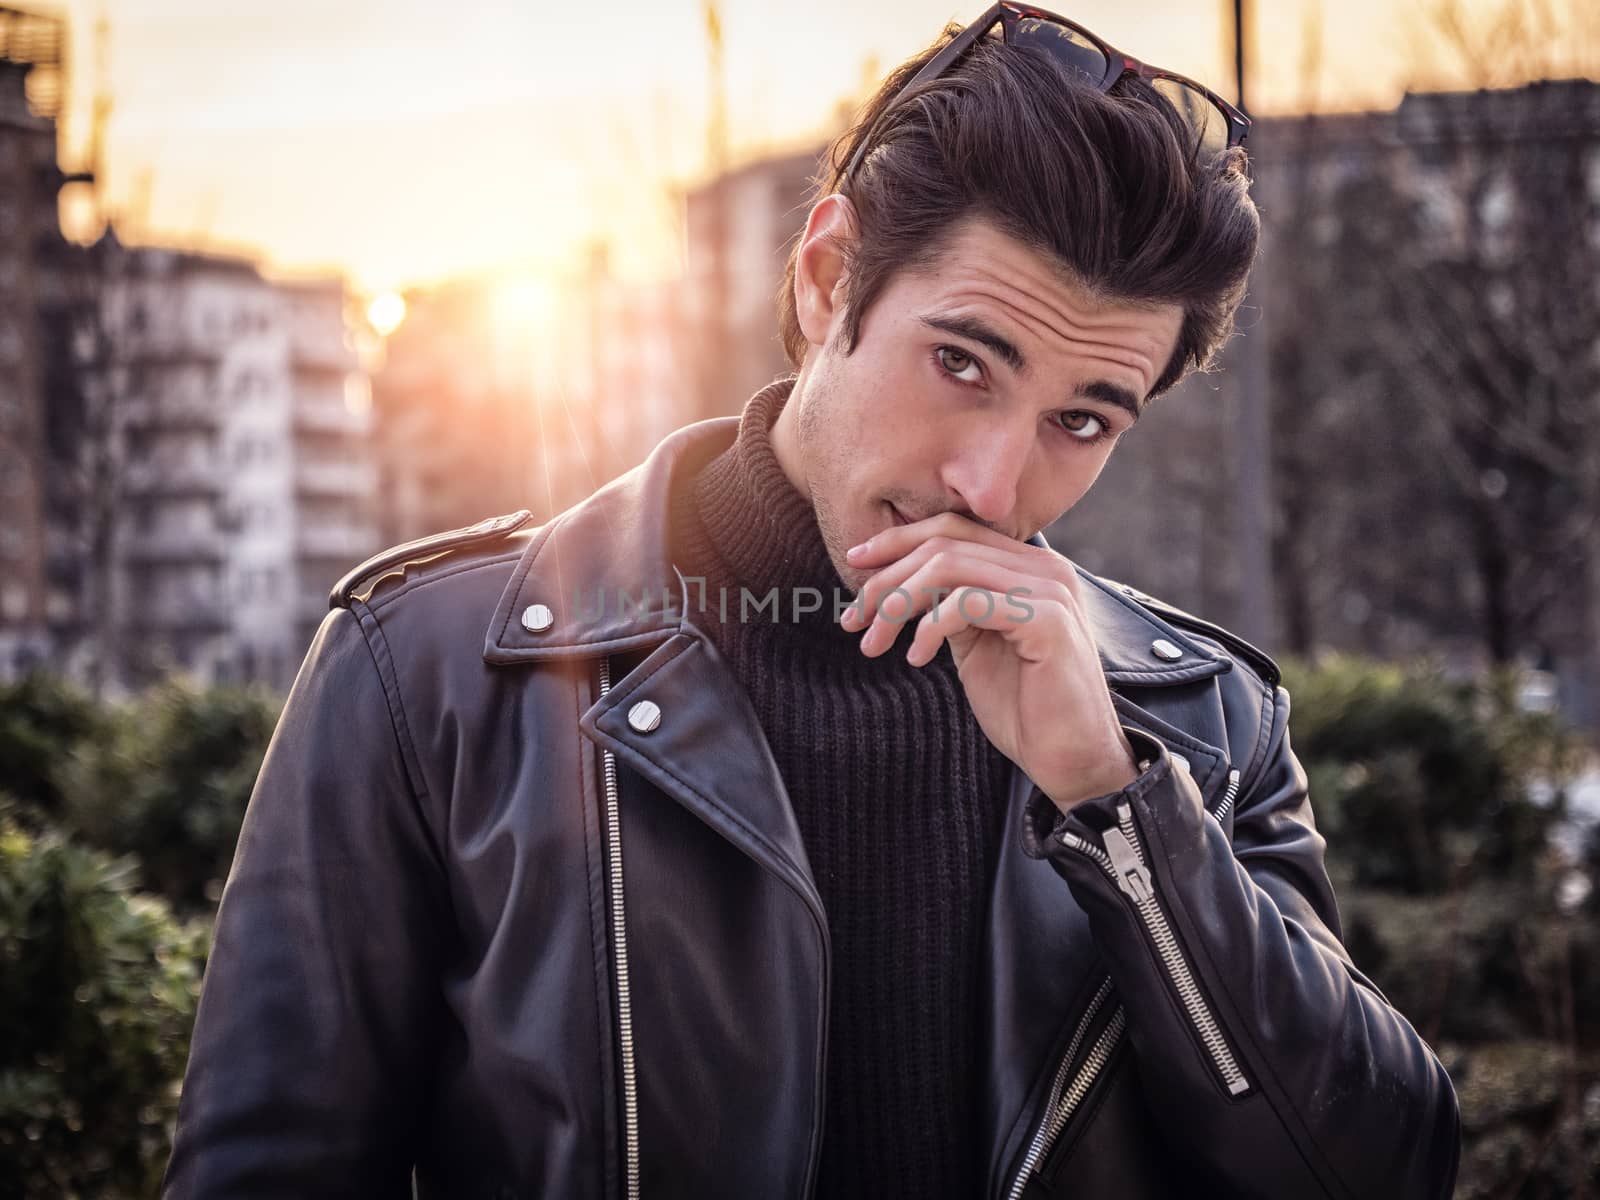 One handsome young man in urban setting in modern city, standing, wearing black leather jacket and jeans, looking at camera, at sunset